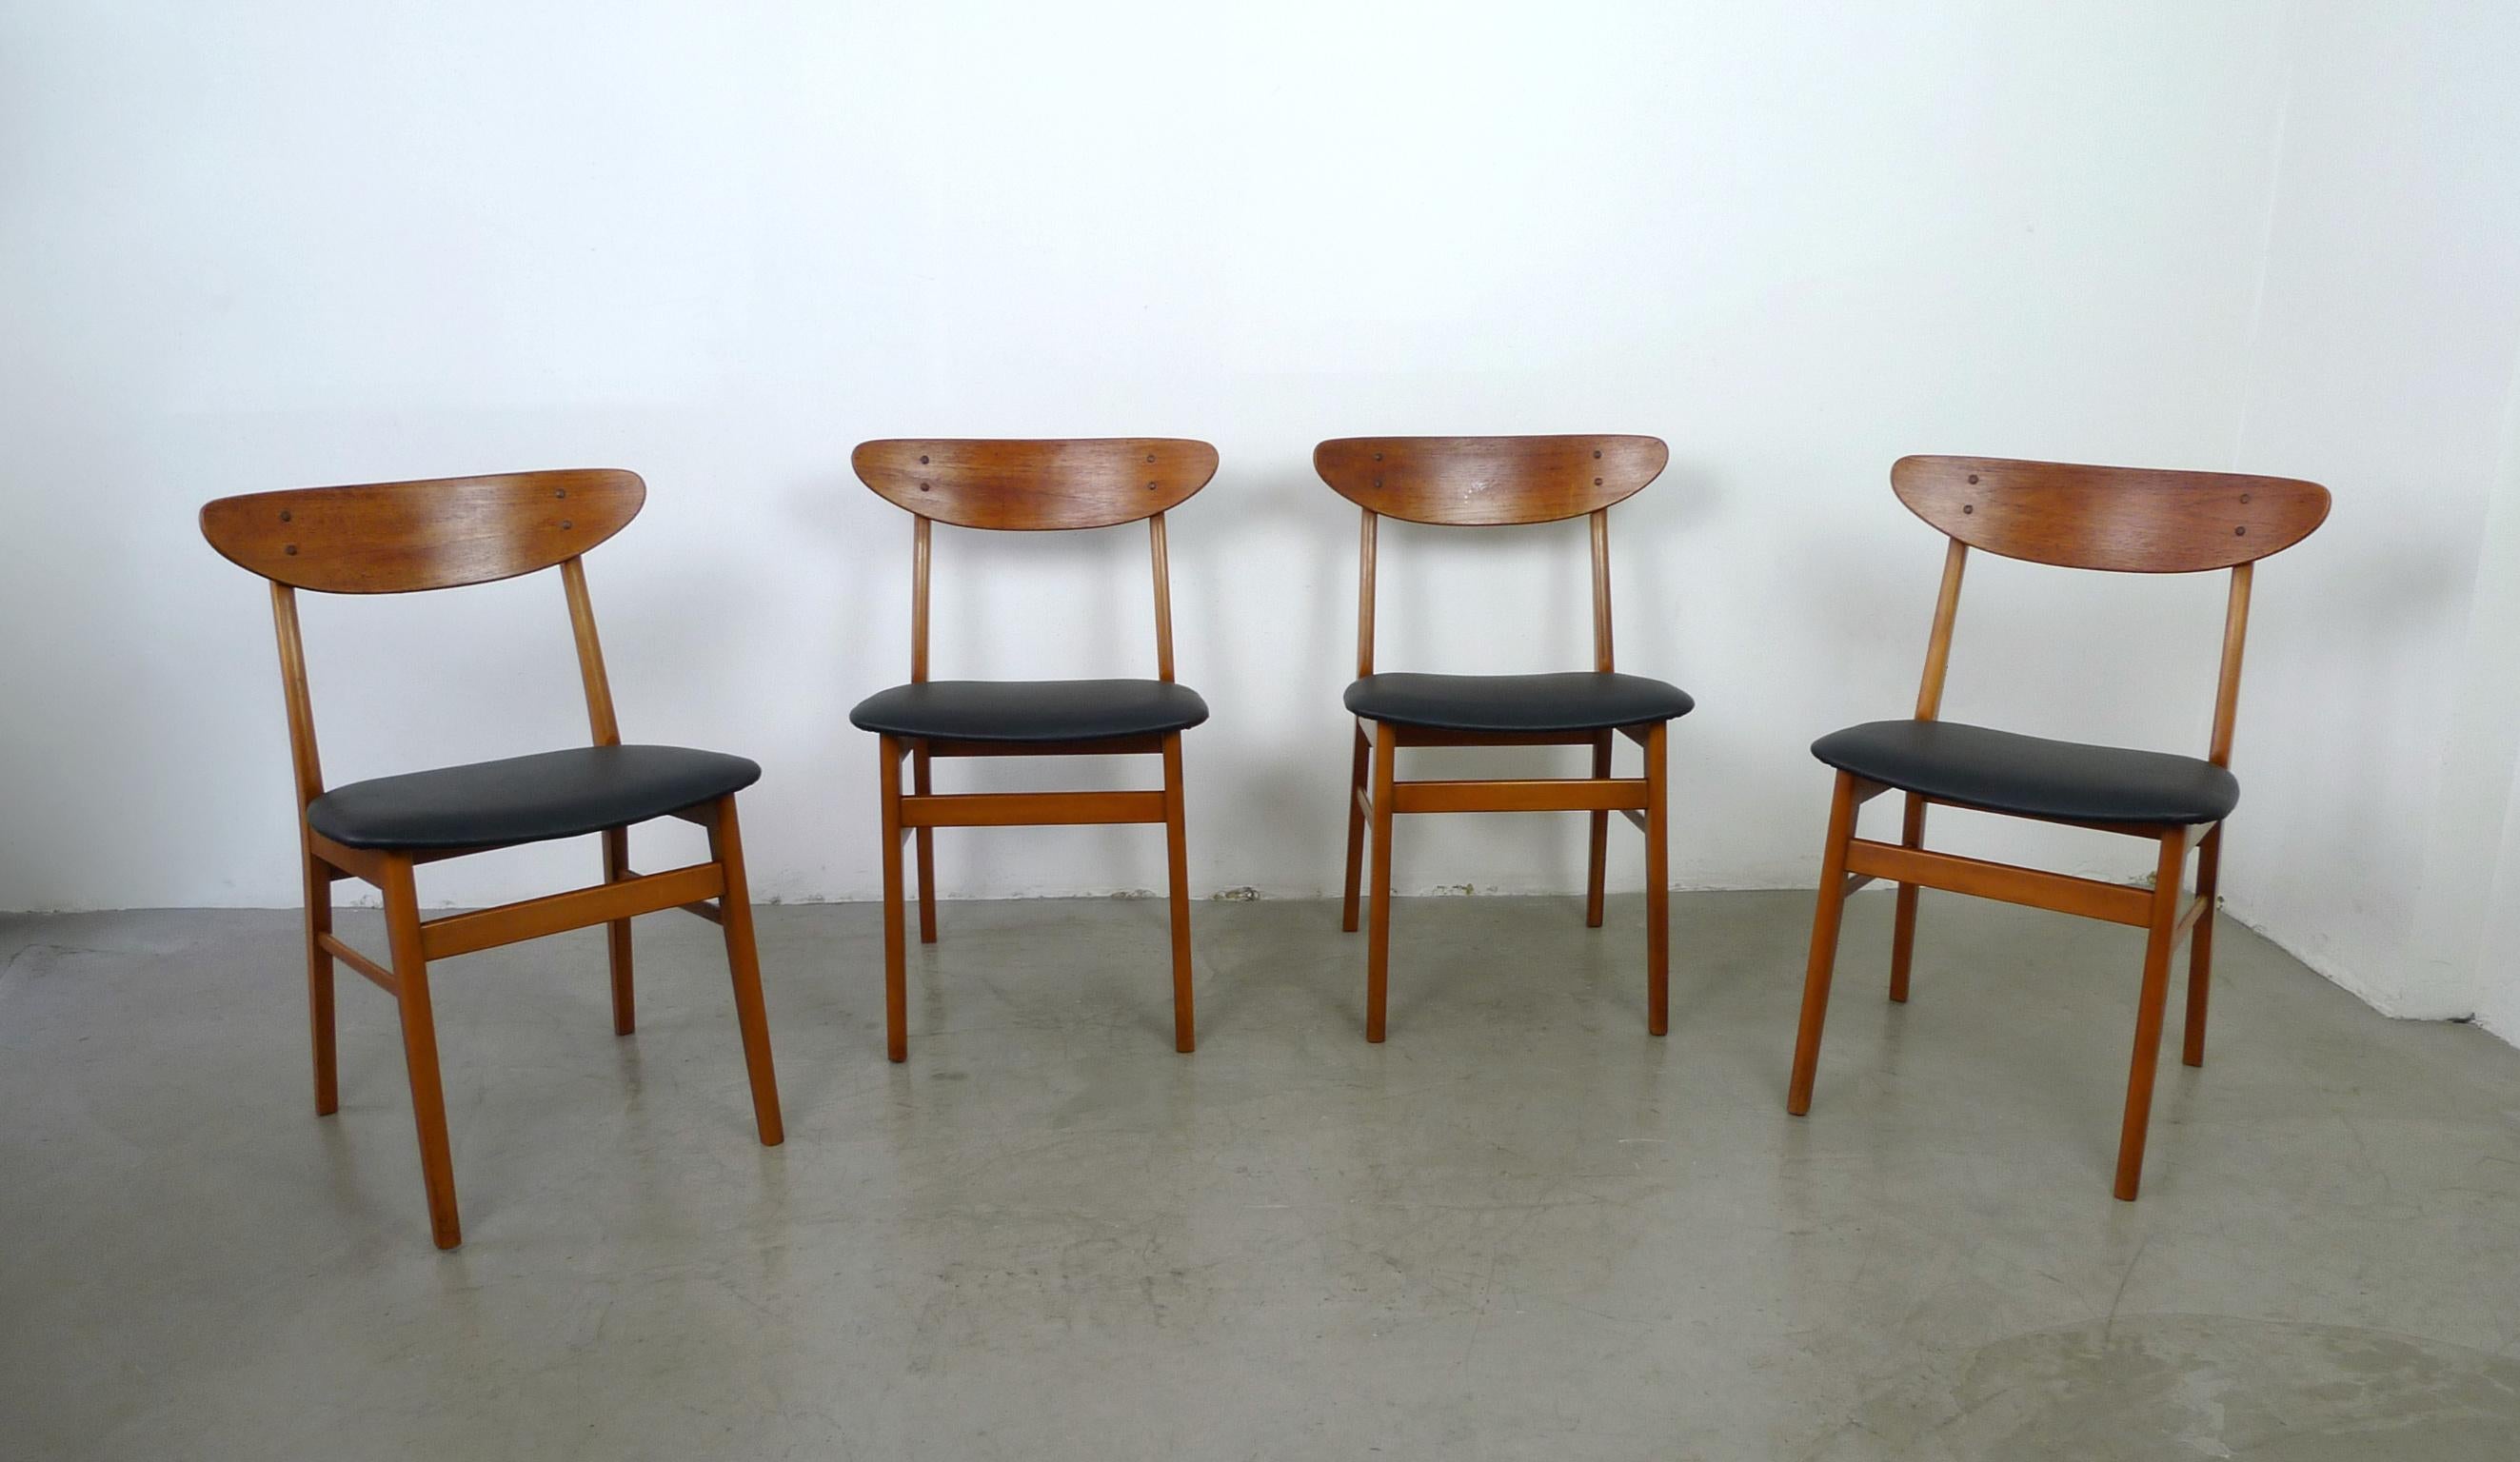 This set of four model 210 dining chairs by Farstrup was made in the 1960s in Denmark. The frame is made of beech wood and the back is made of teak. The seats are newly covered with black imitation leather.